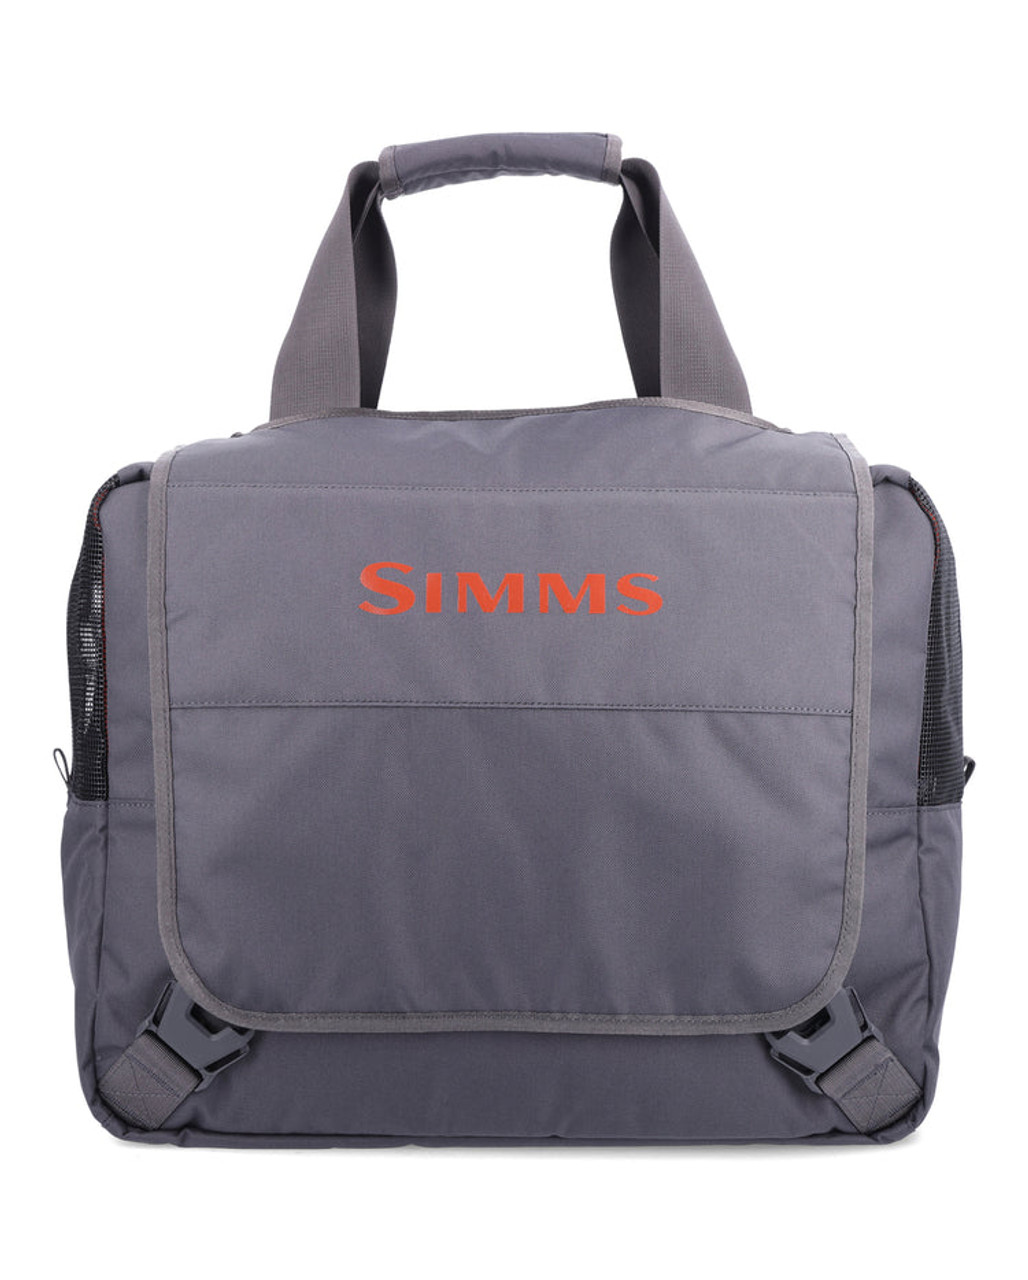 https://cdn11.bigcommerce.com/s-a9s171pbr5/images/stencil/1280x1280/products/3381/8225/13610-025-riverkit-wader-tote-Tabletop-s23-front-1000x1245-e3be13ab-04de-4d1b-bea3-12f268c04bed_750x__13007.1690918577.jpg?c=1